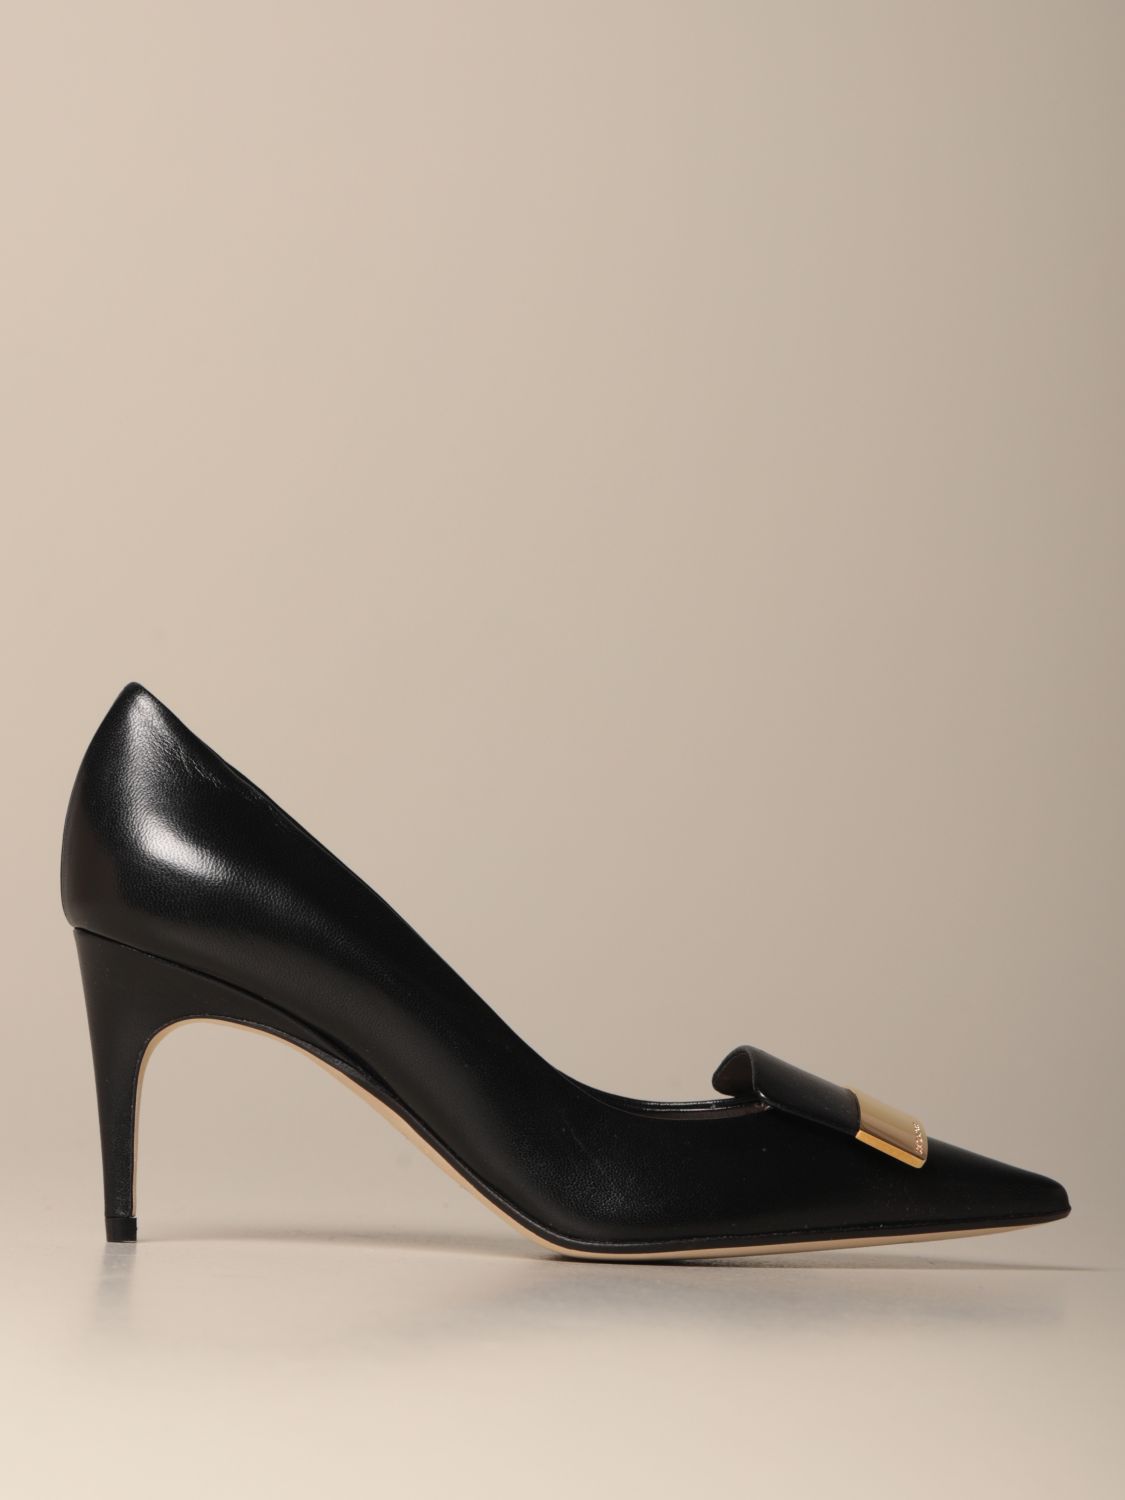 Buy > sergio rossi sale shoes > in stock